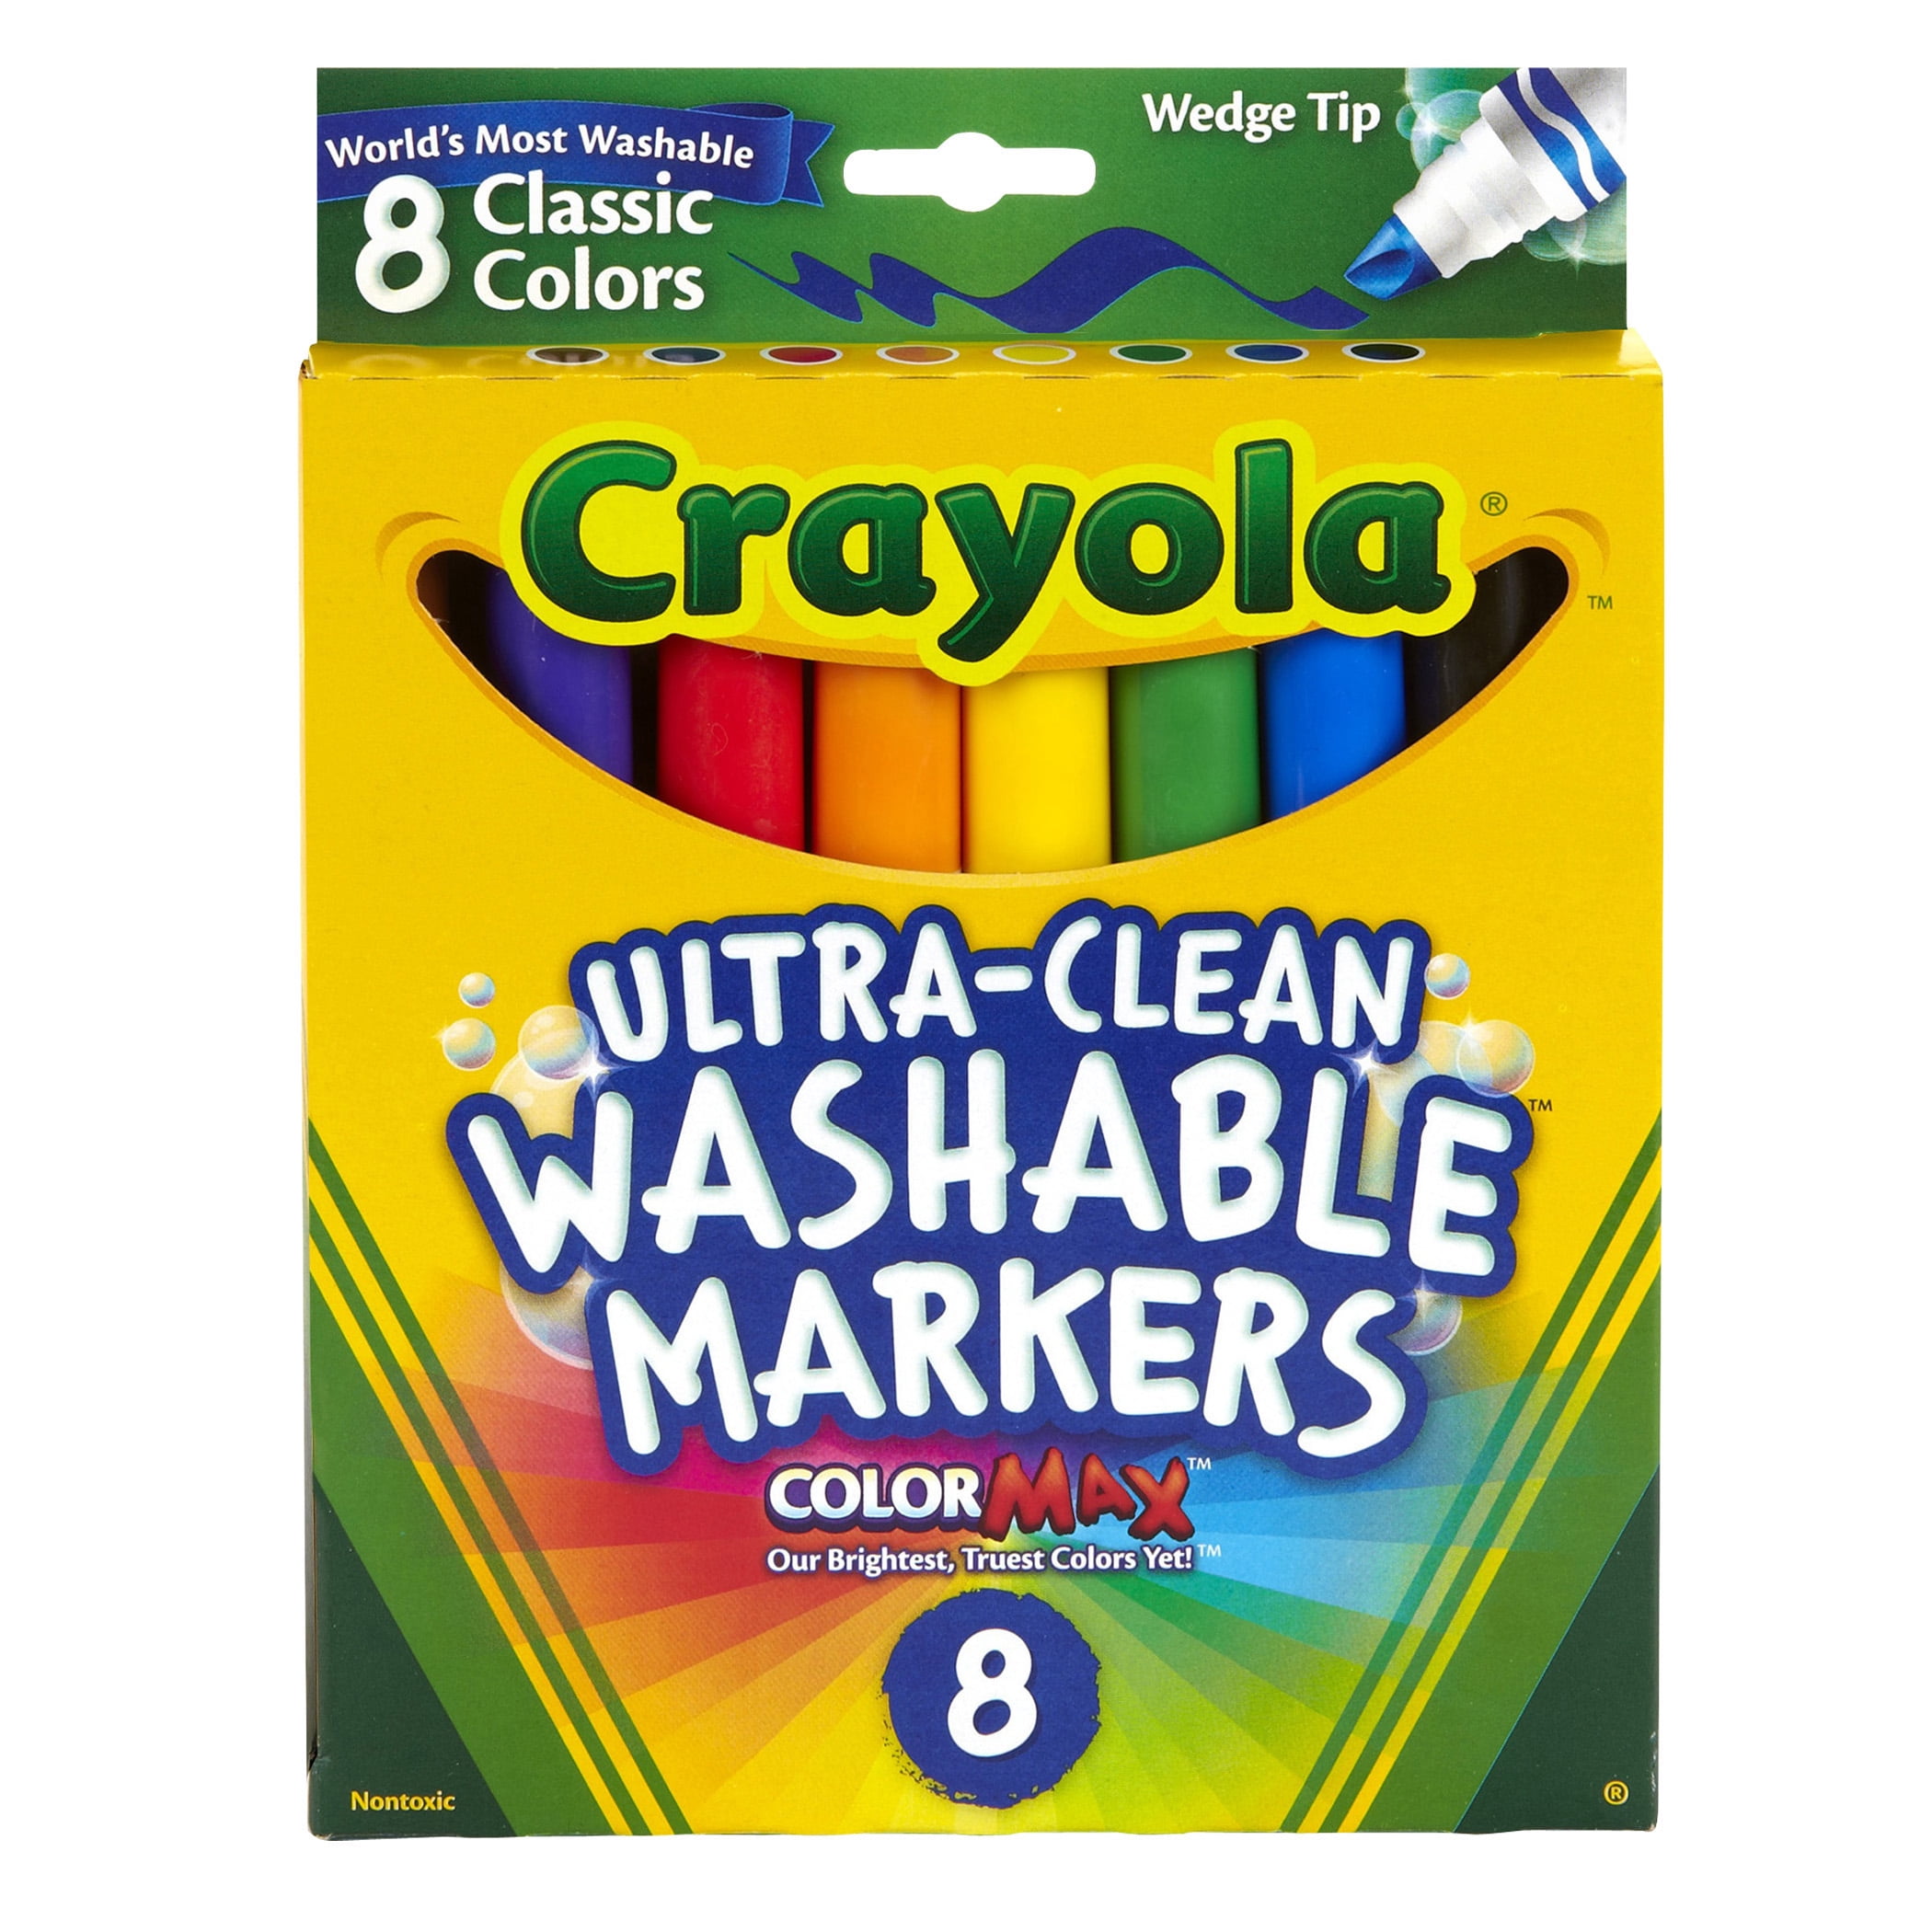 Classroom Pack - 6 Boxes of 8 Color Crazy Dots Markers - Children's  Washable Easy Grip Non-Toxic Paint - 48 Total Marker